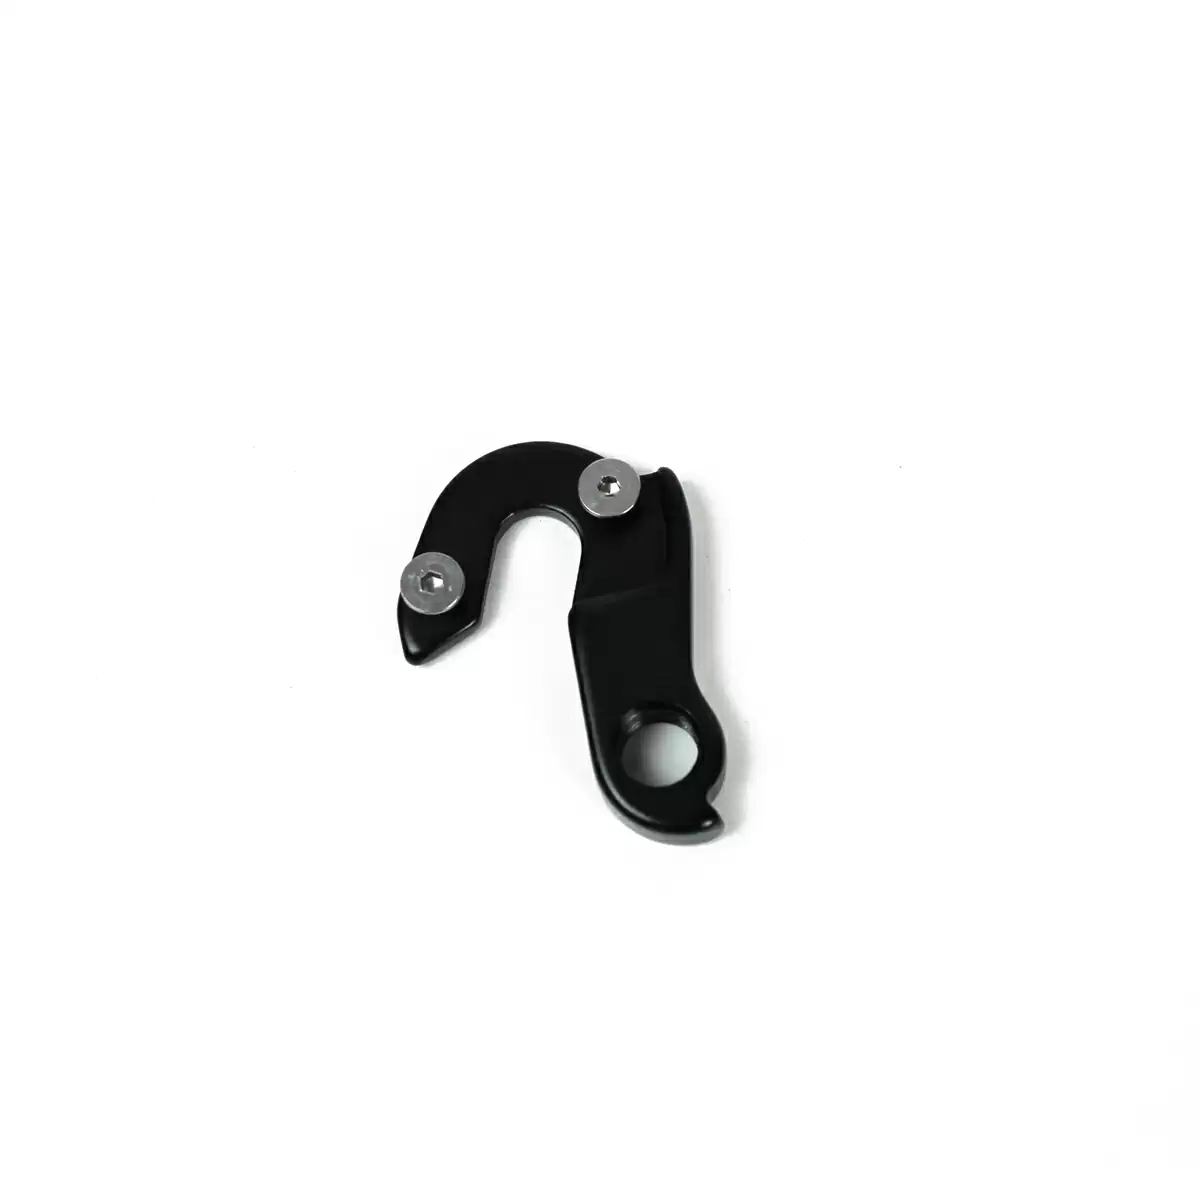 Derailleur hanger for LC and GT models - image